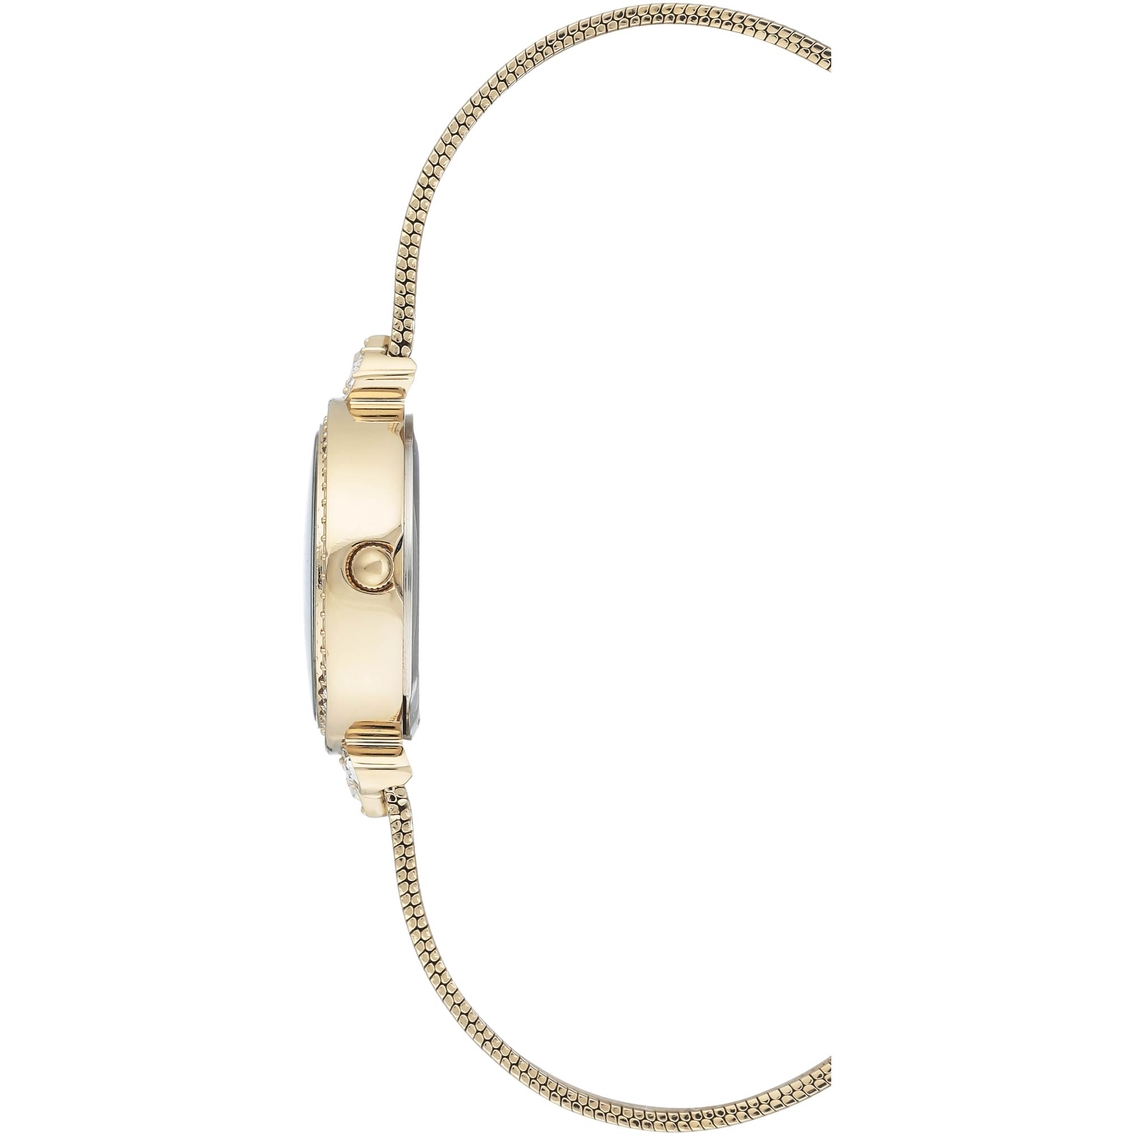 Anne Klein Women's Crystal Accented Chain Bracelet Watch and Bangle Set AK/3202GBST - Image 3 of 3